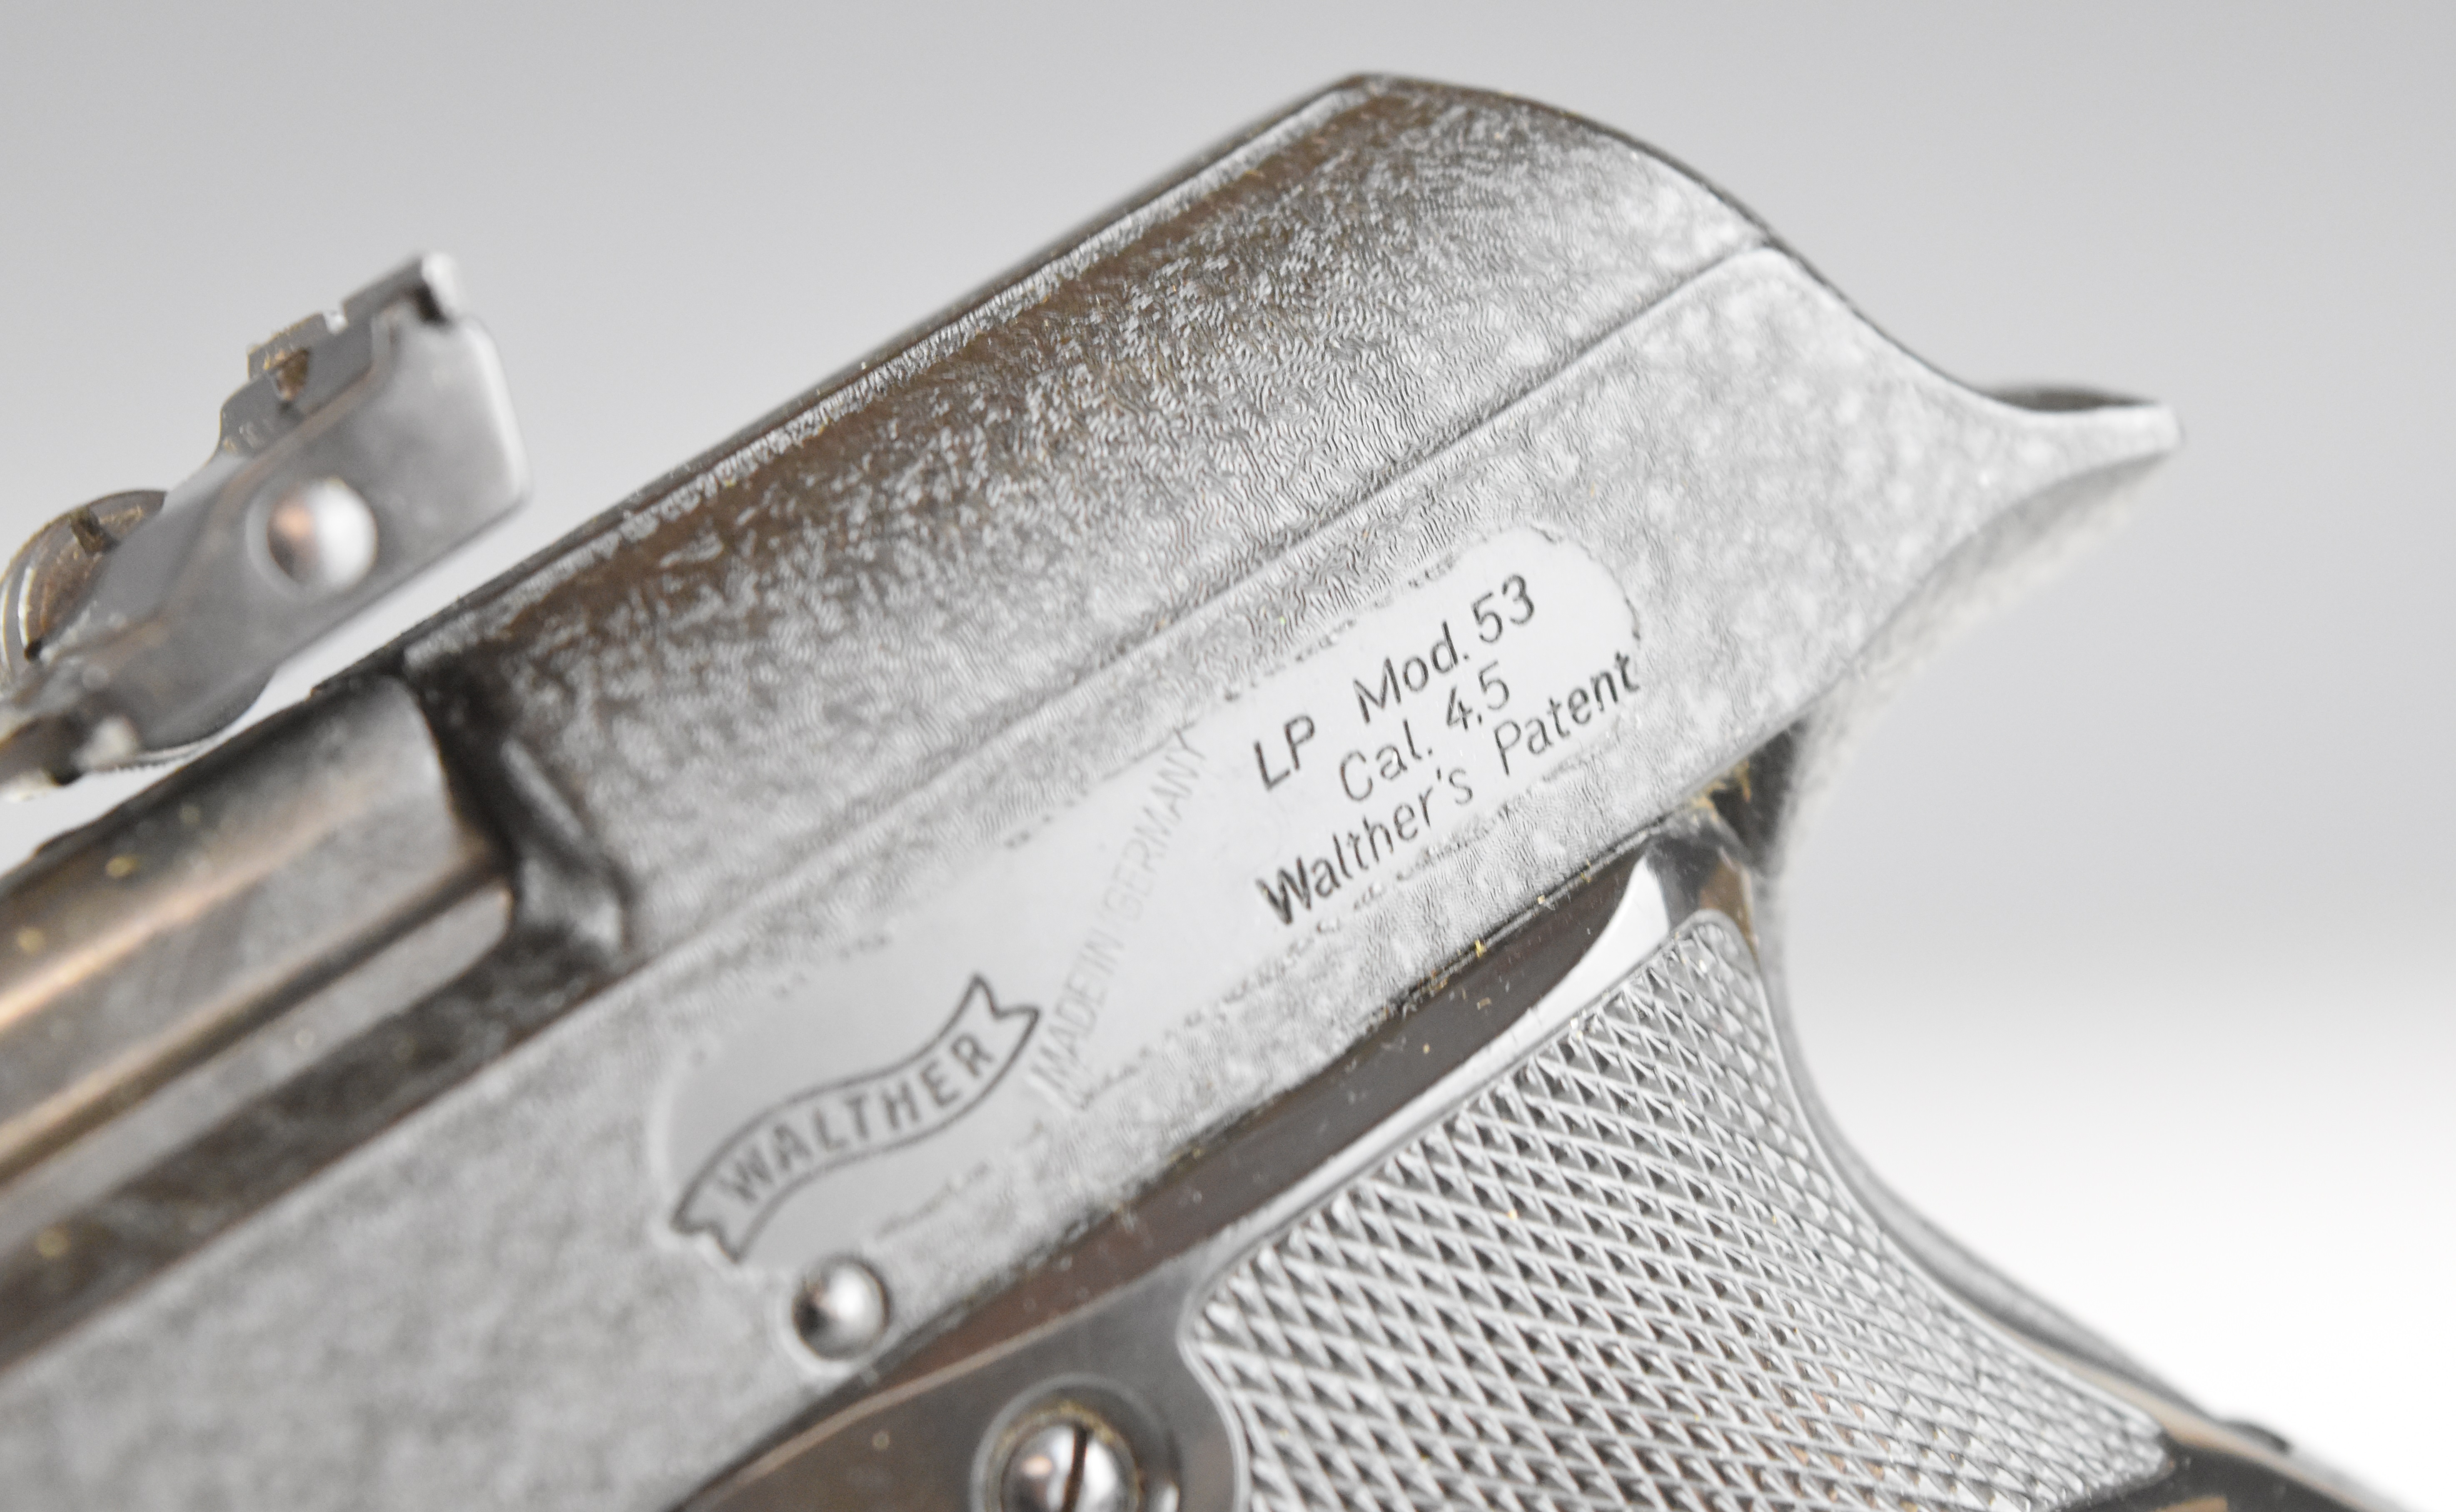 Walther Luftpistole Model LP 53 .177 target air pistol with named, shaped and chequered composite - Image 9 of 13